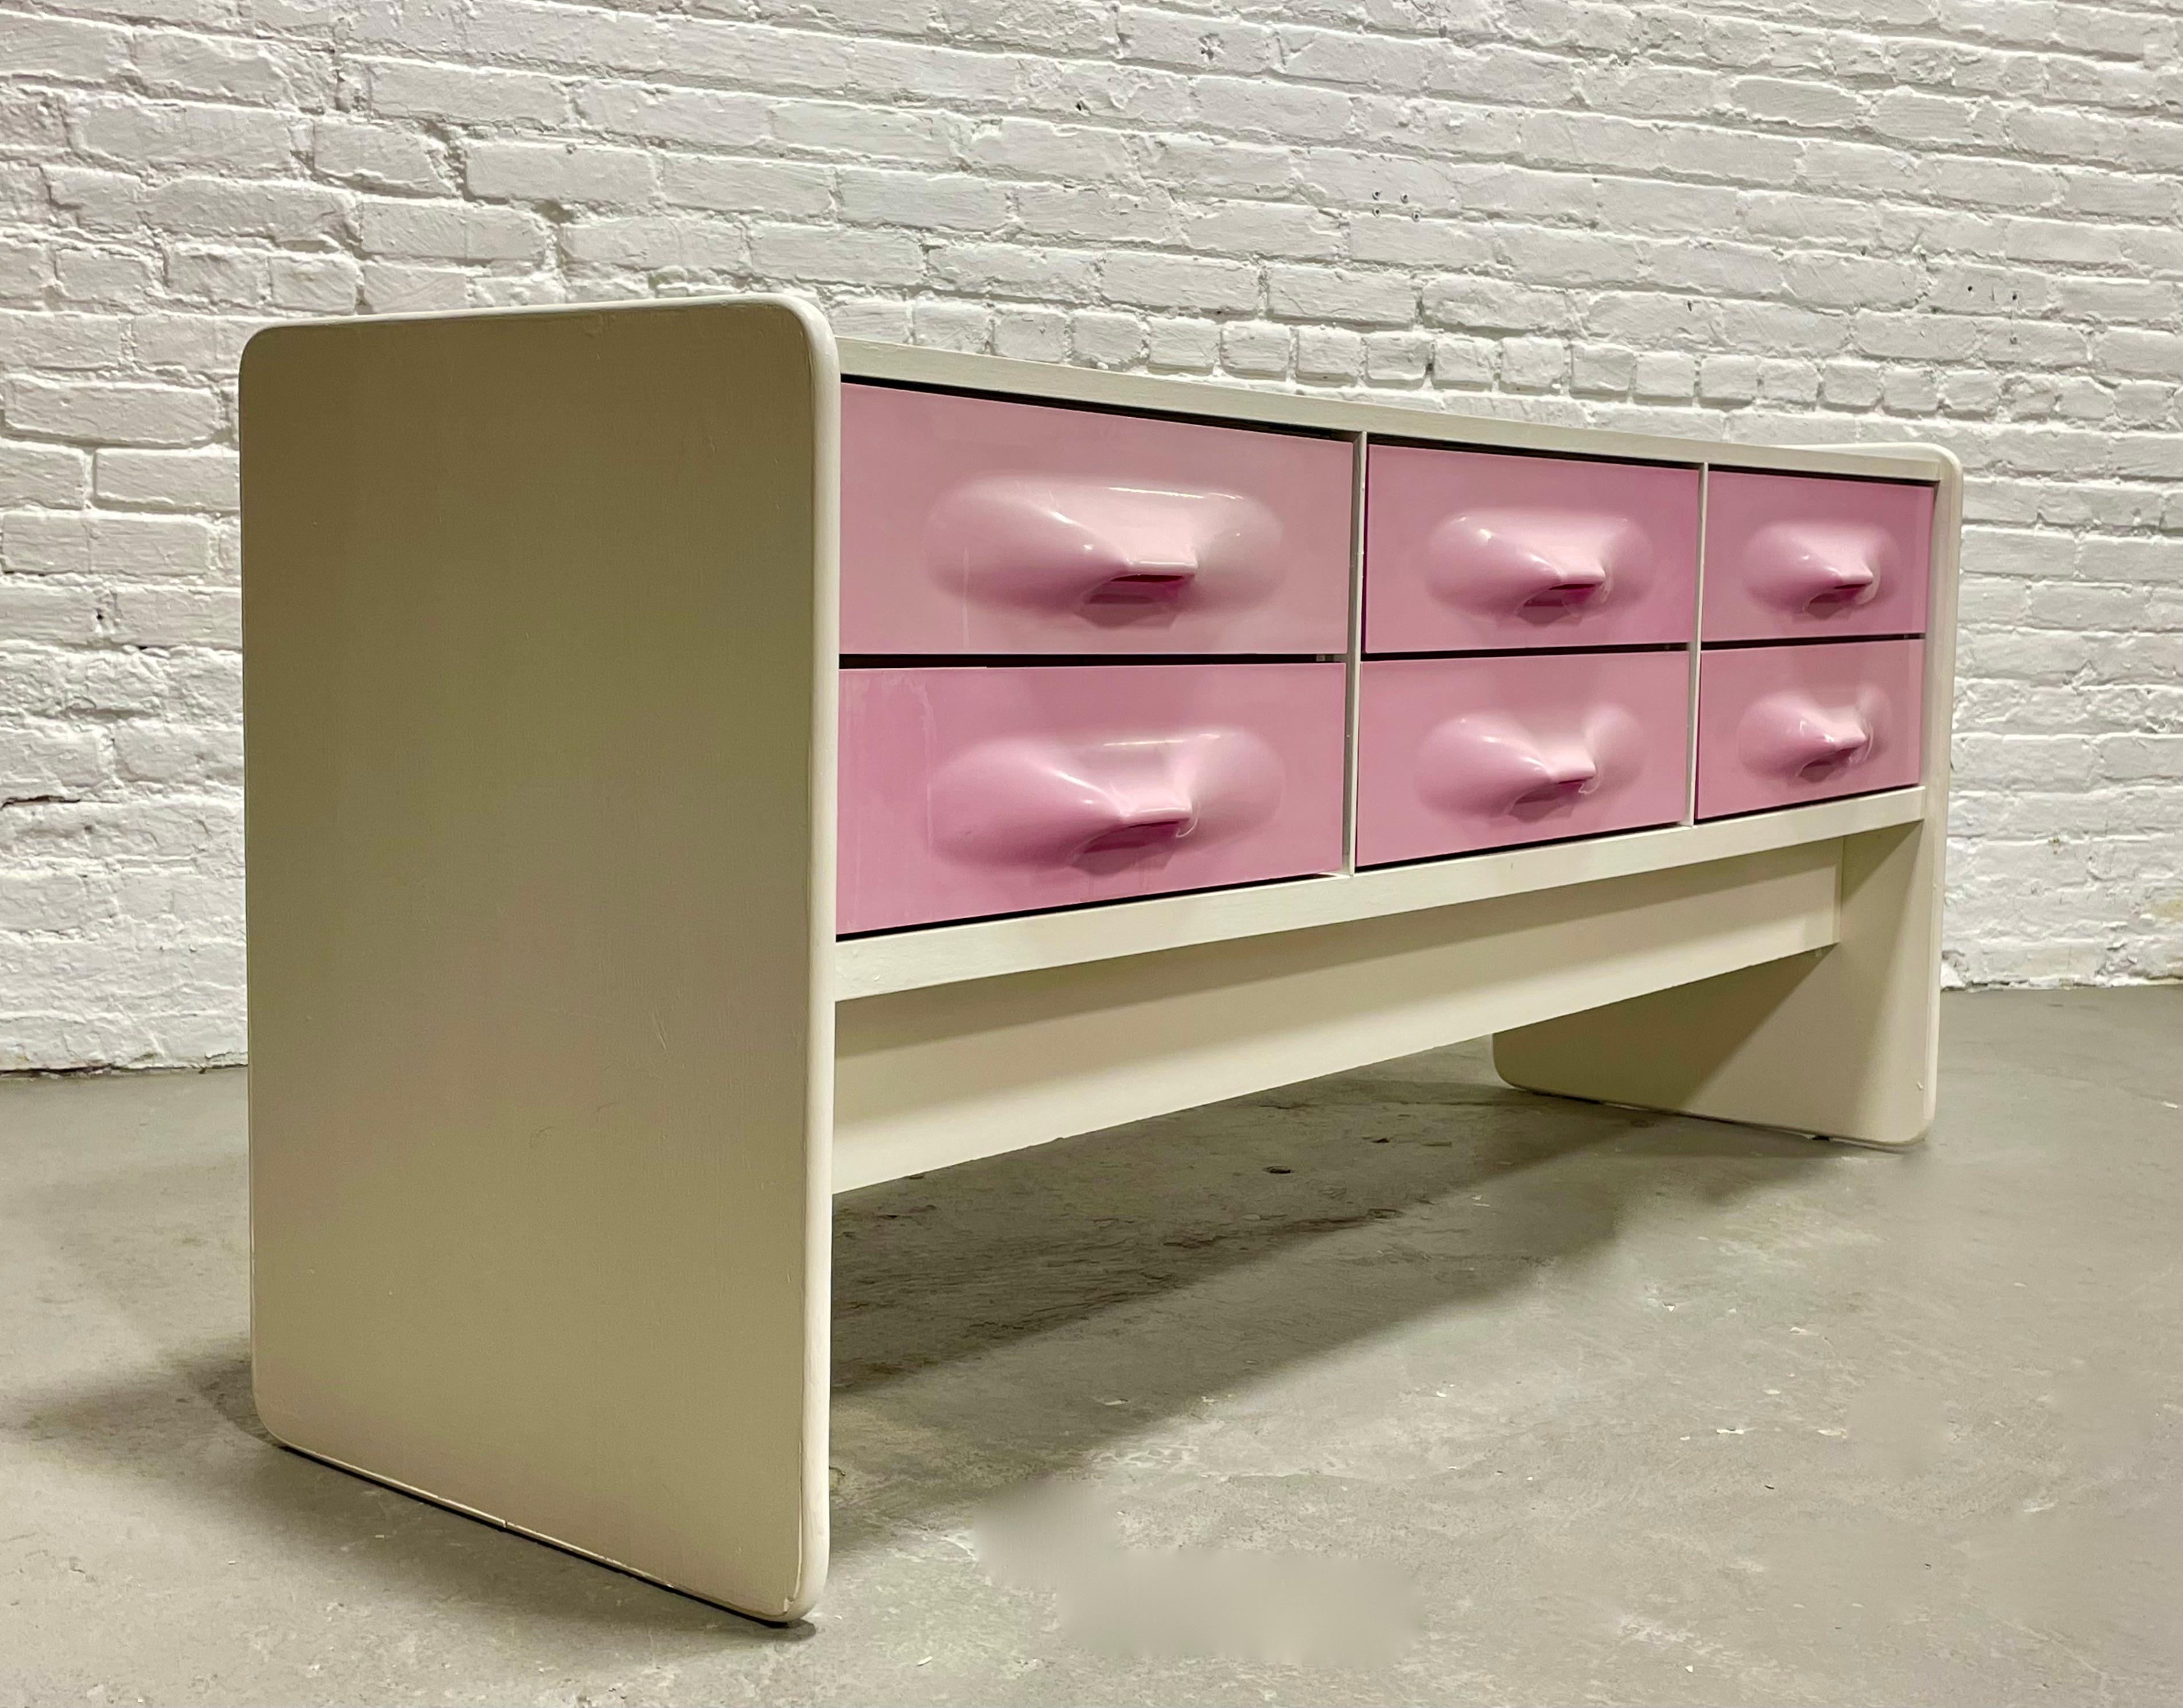 Plastic Midcentury Raymond Loewy Styled Molded Long Dresser by Giovanni Maur for Trecor